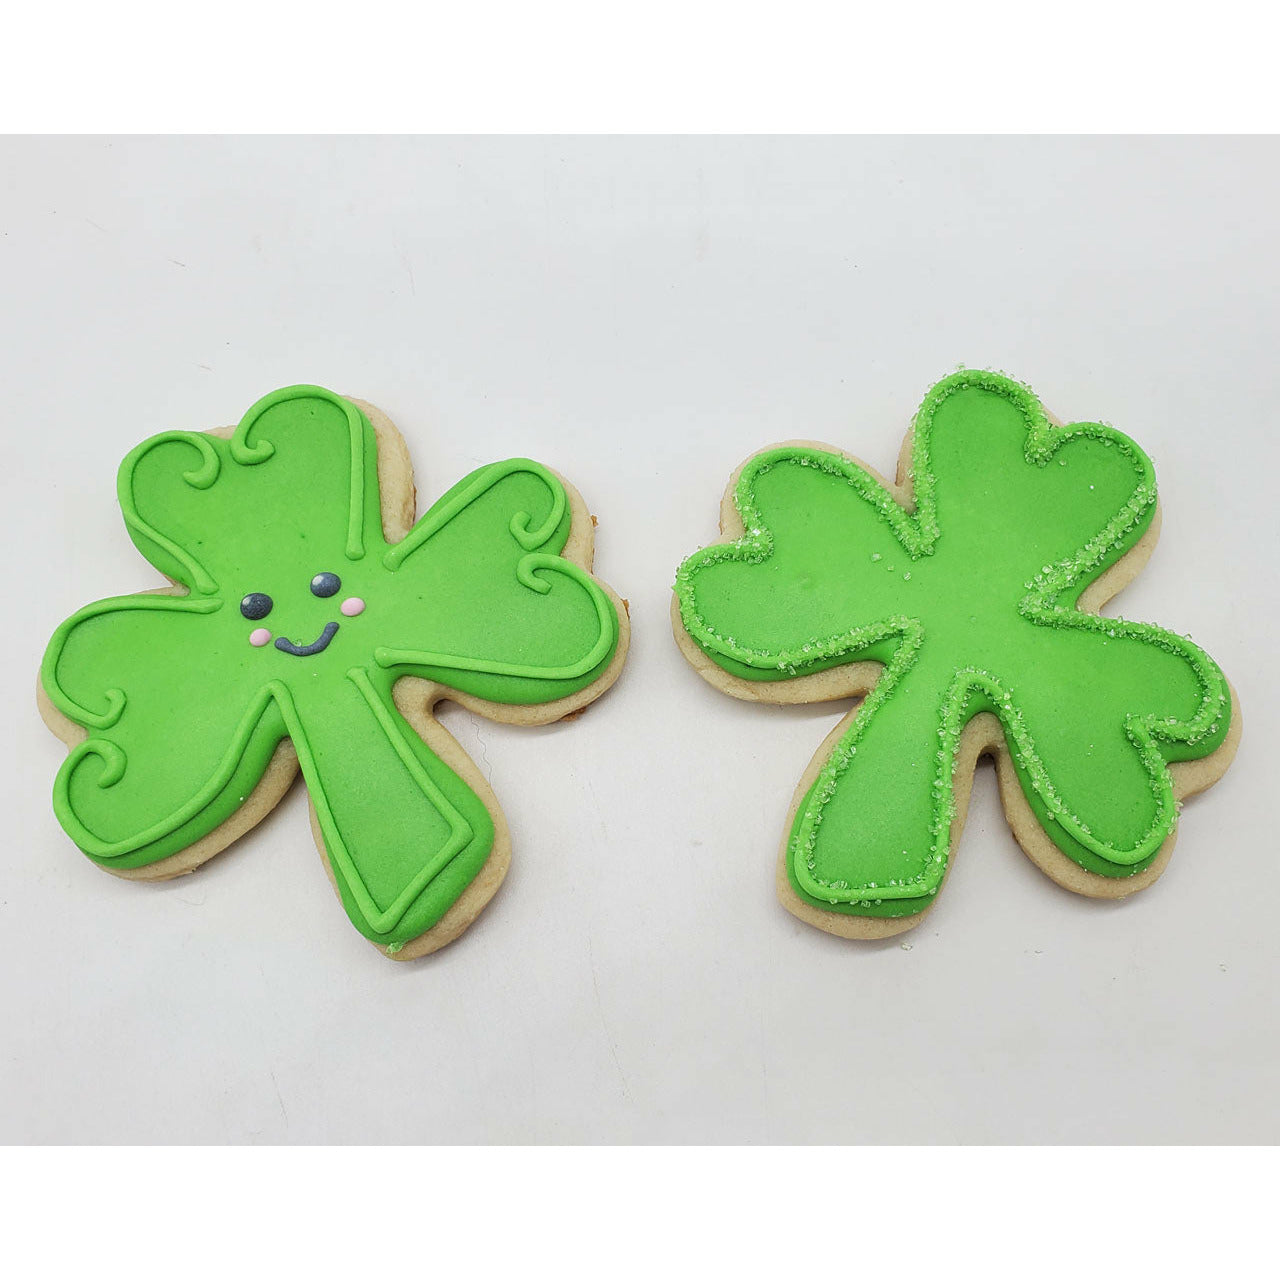 st. Patrick's day cookies delivery near me scottsdale